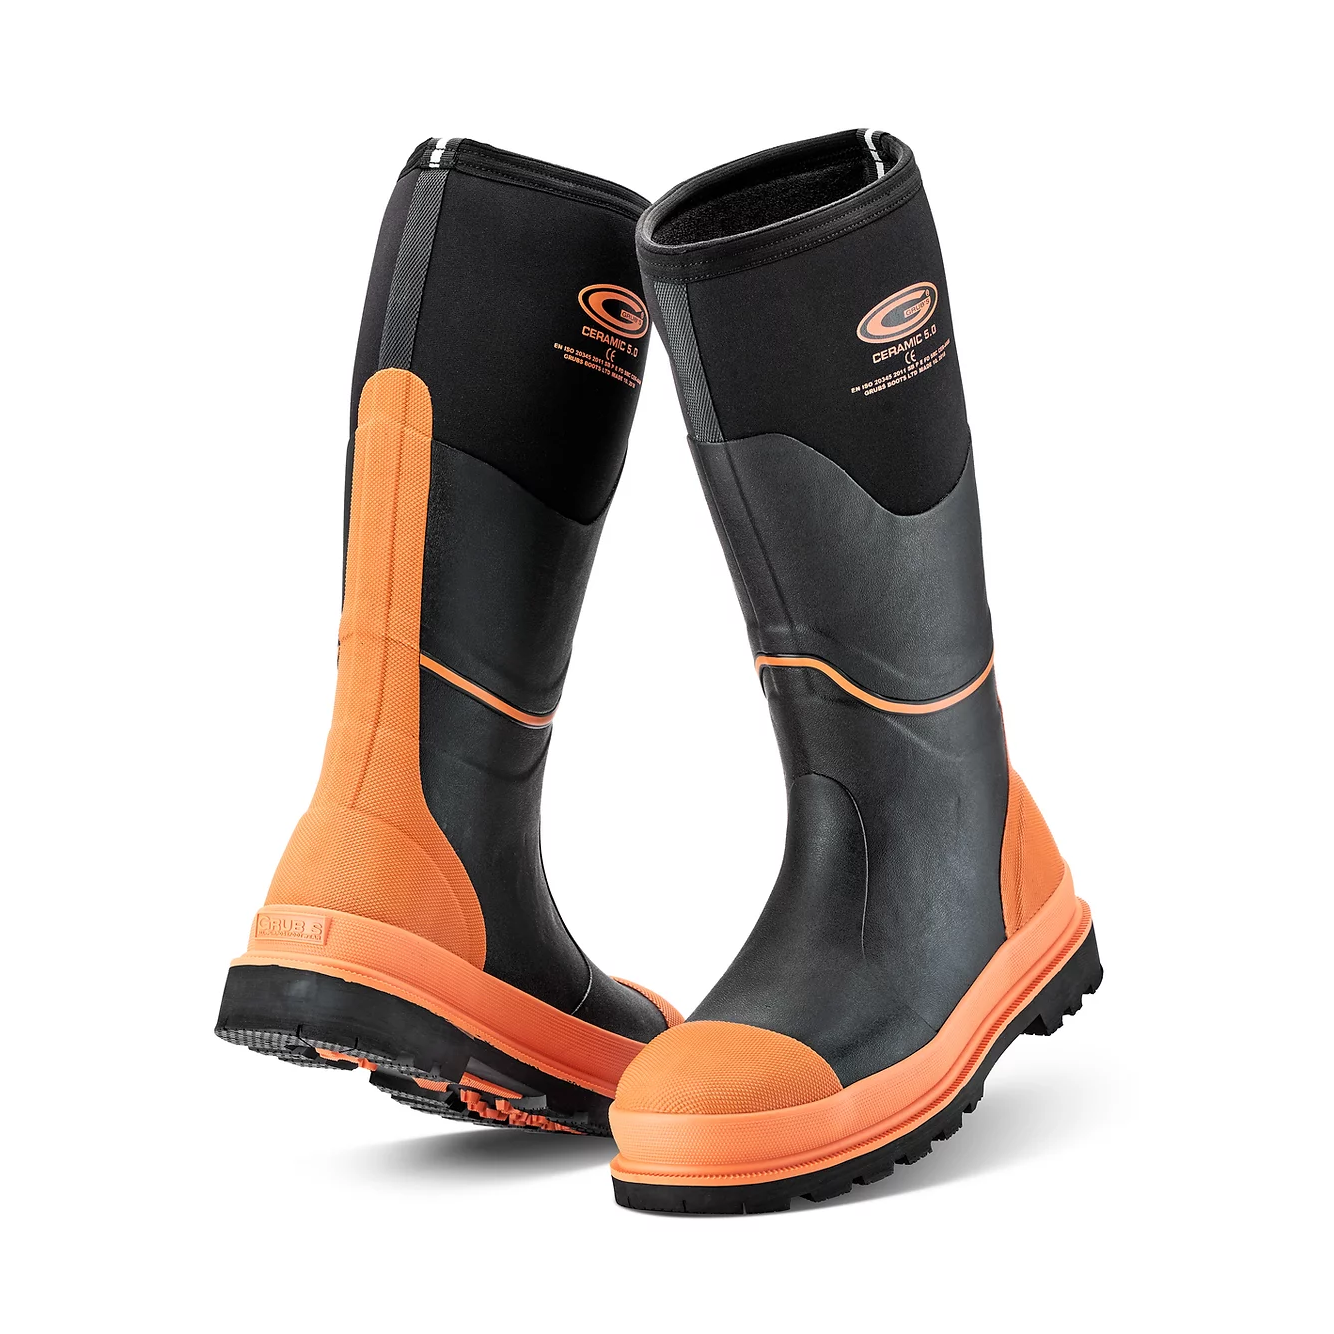 Grubs Ceramic 5.0 S5 Safety Boot